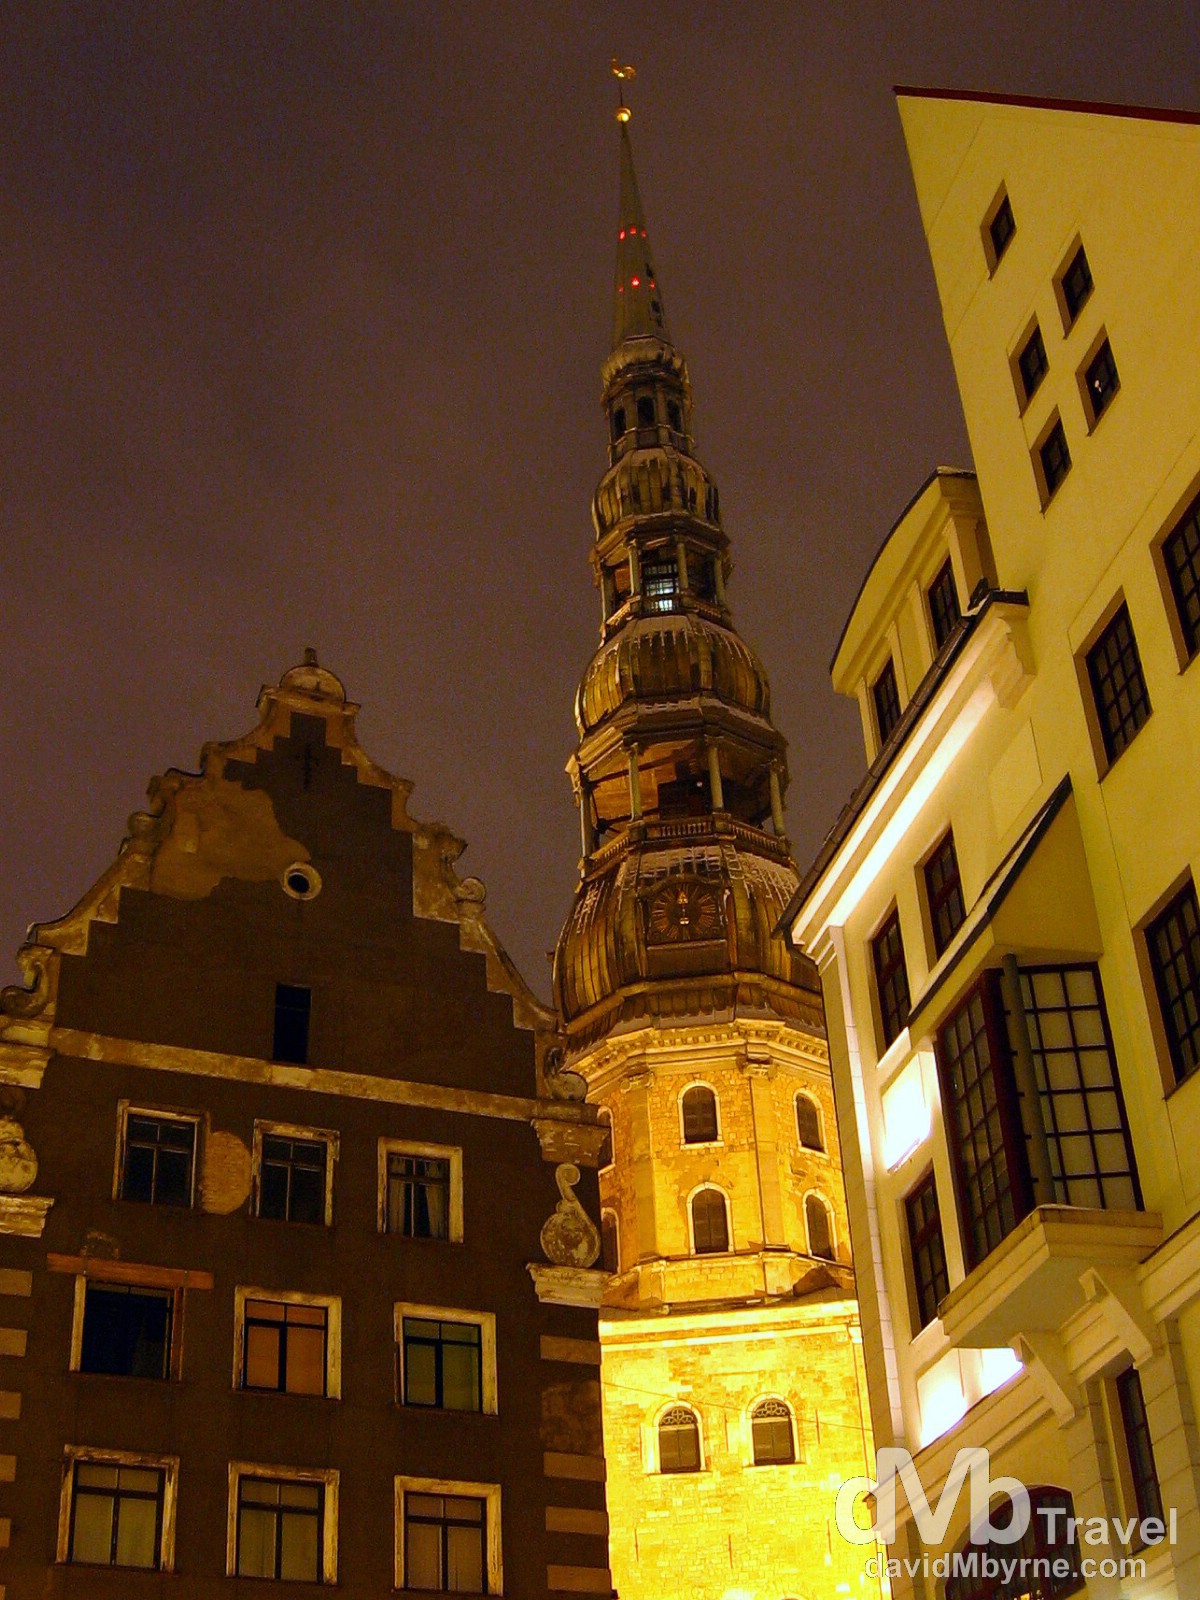 Building facades & the tower of Riga's skyline centerpiece, St Peter's Church, as seen Town Hall Square, Riga, Latvia. March 2, 2006.